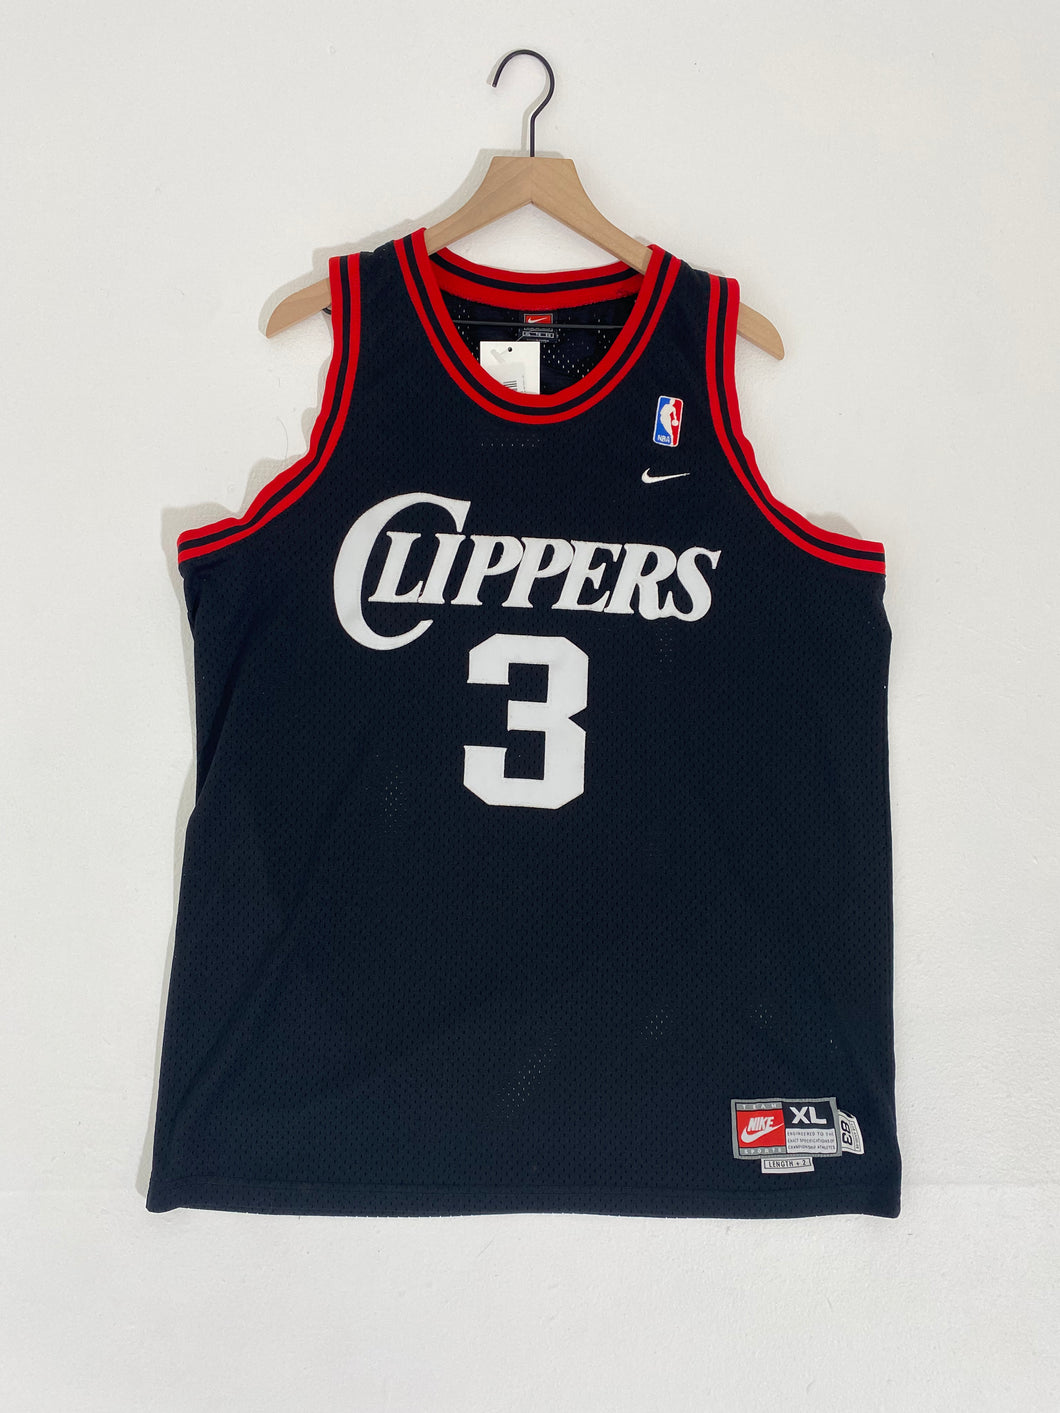 Los Angeles Clippers Throwback Apparel & Jerseys